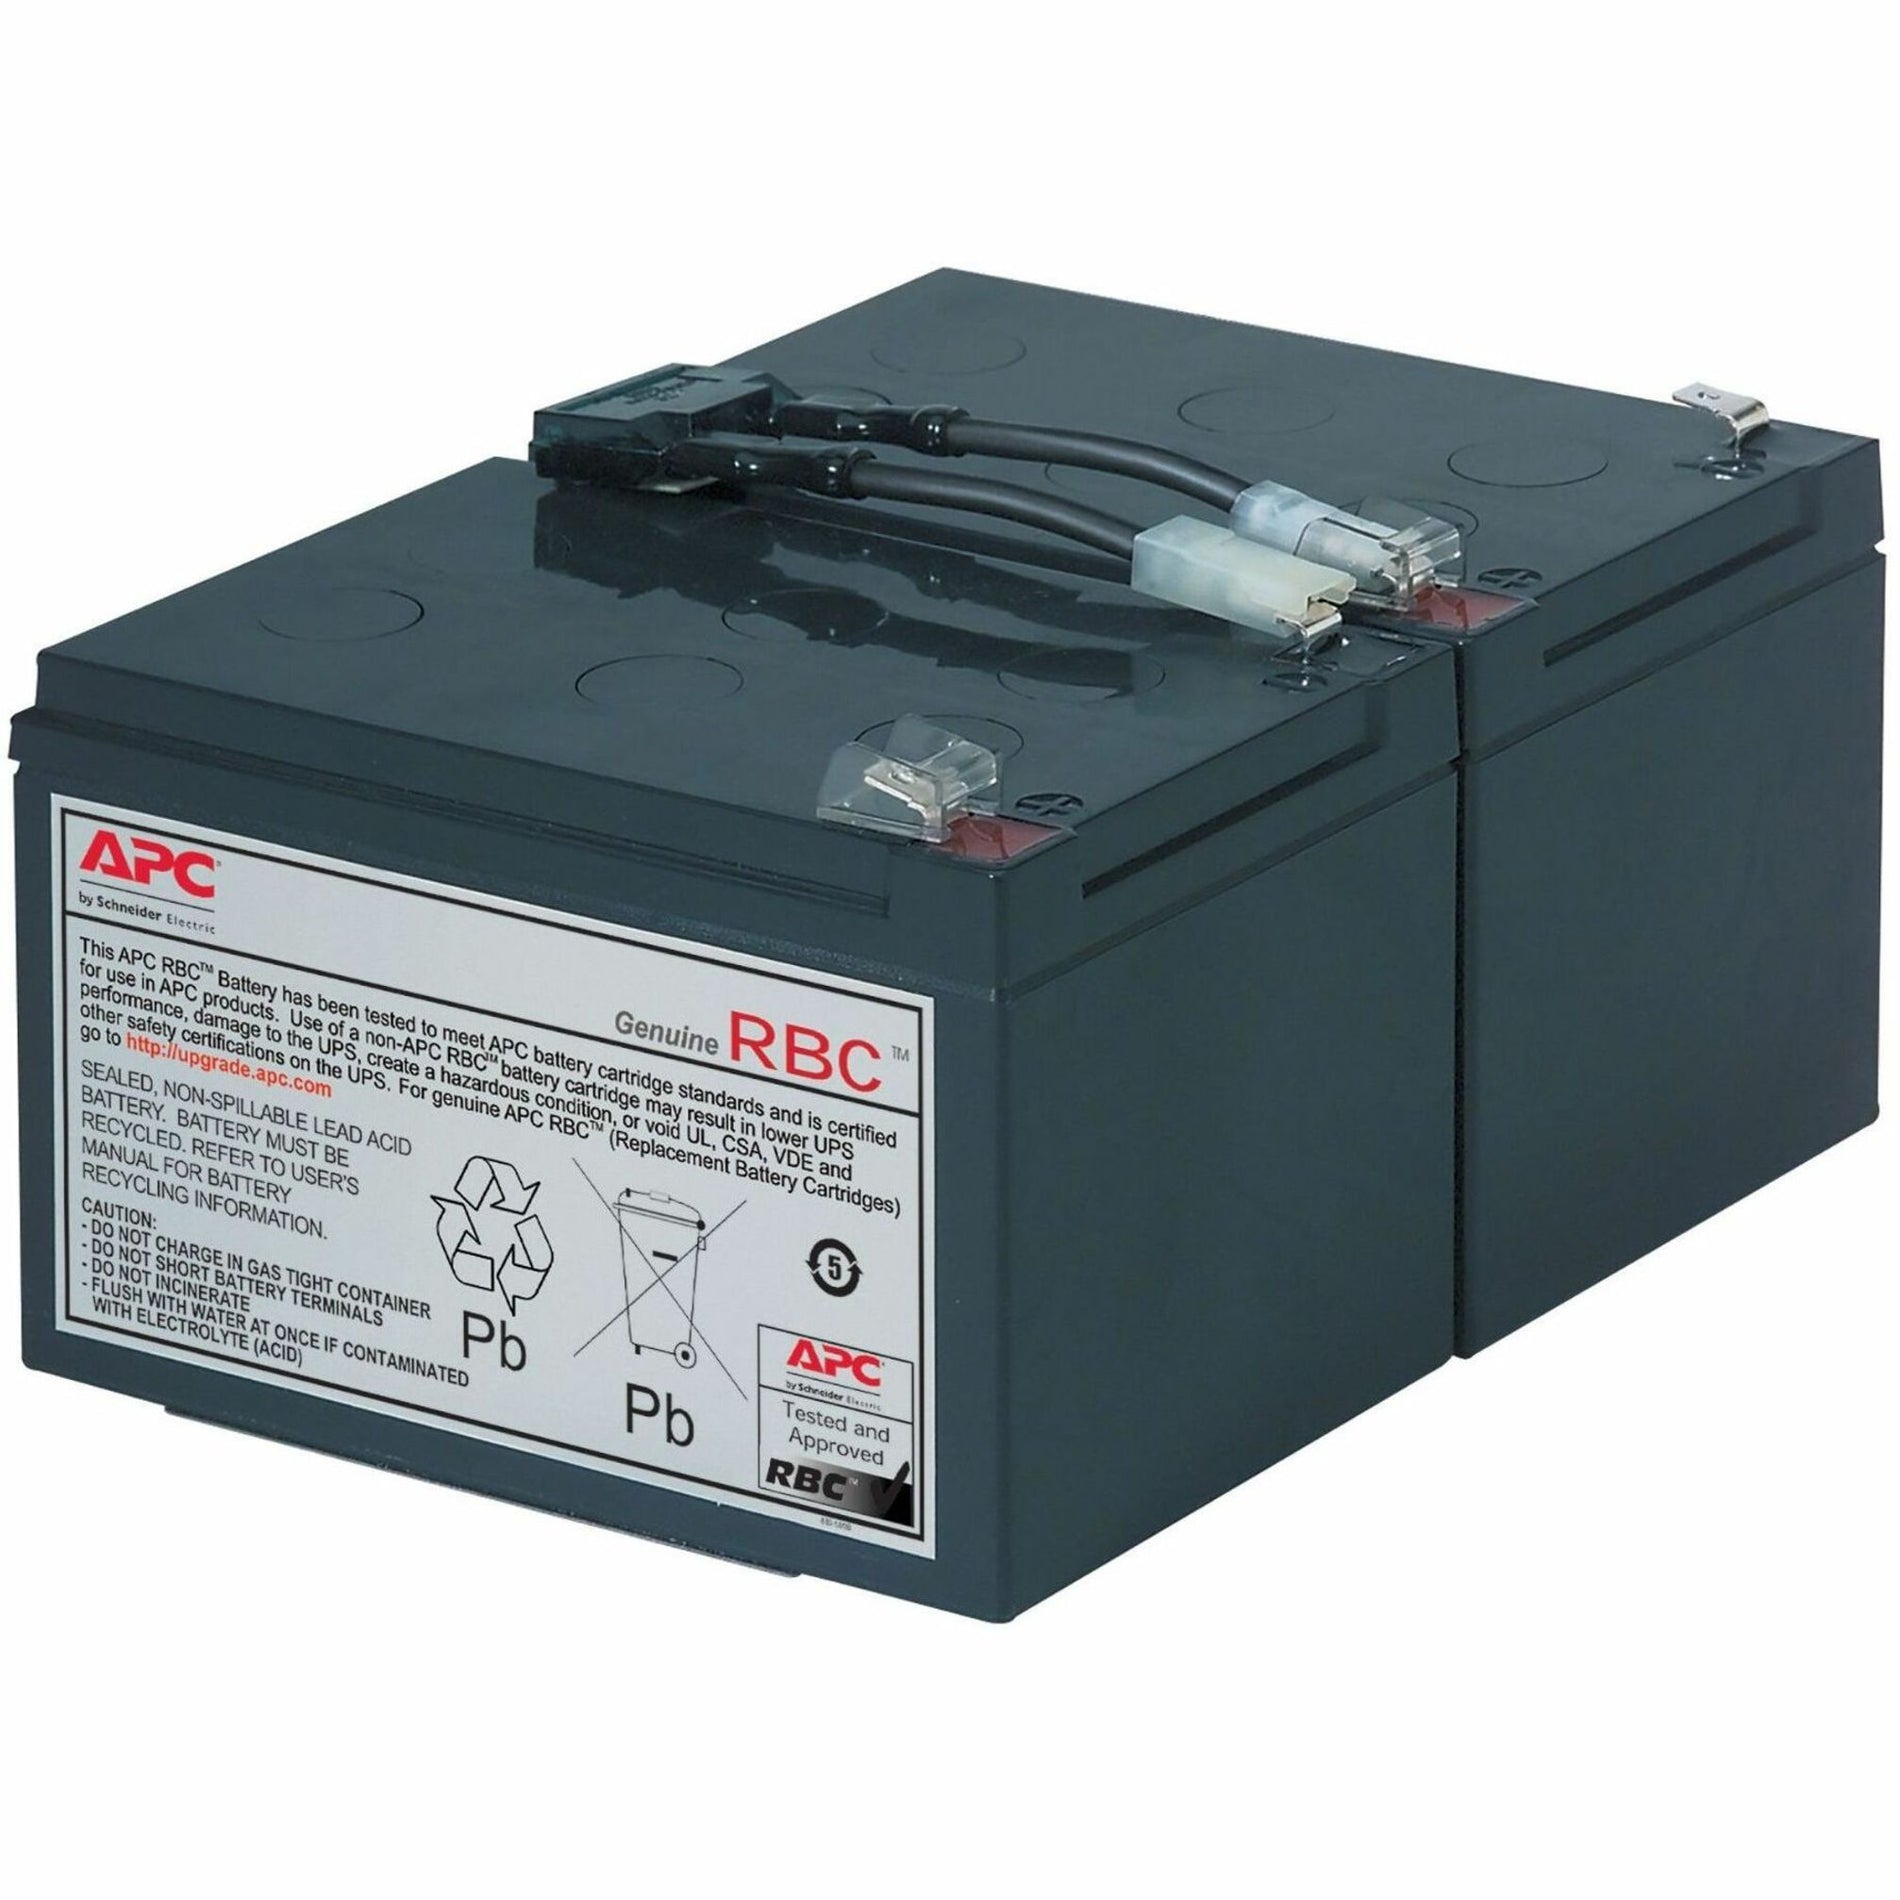 APC RBC6 Replacement Battery Cartridge #6, 2 Year Warranty, Hot Swappable, Lead Acid, 12V DC